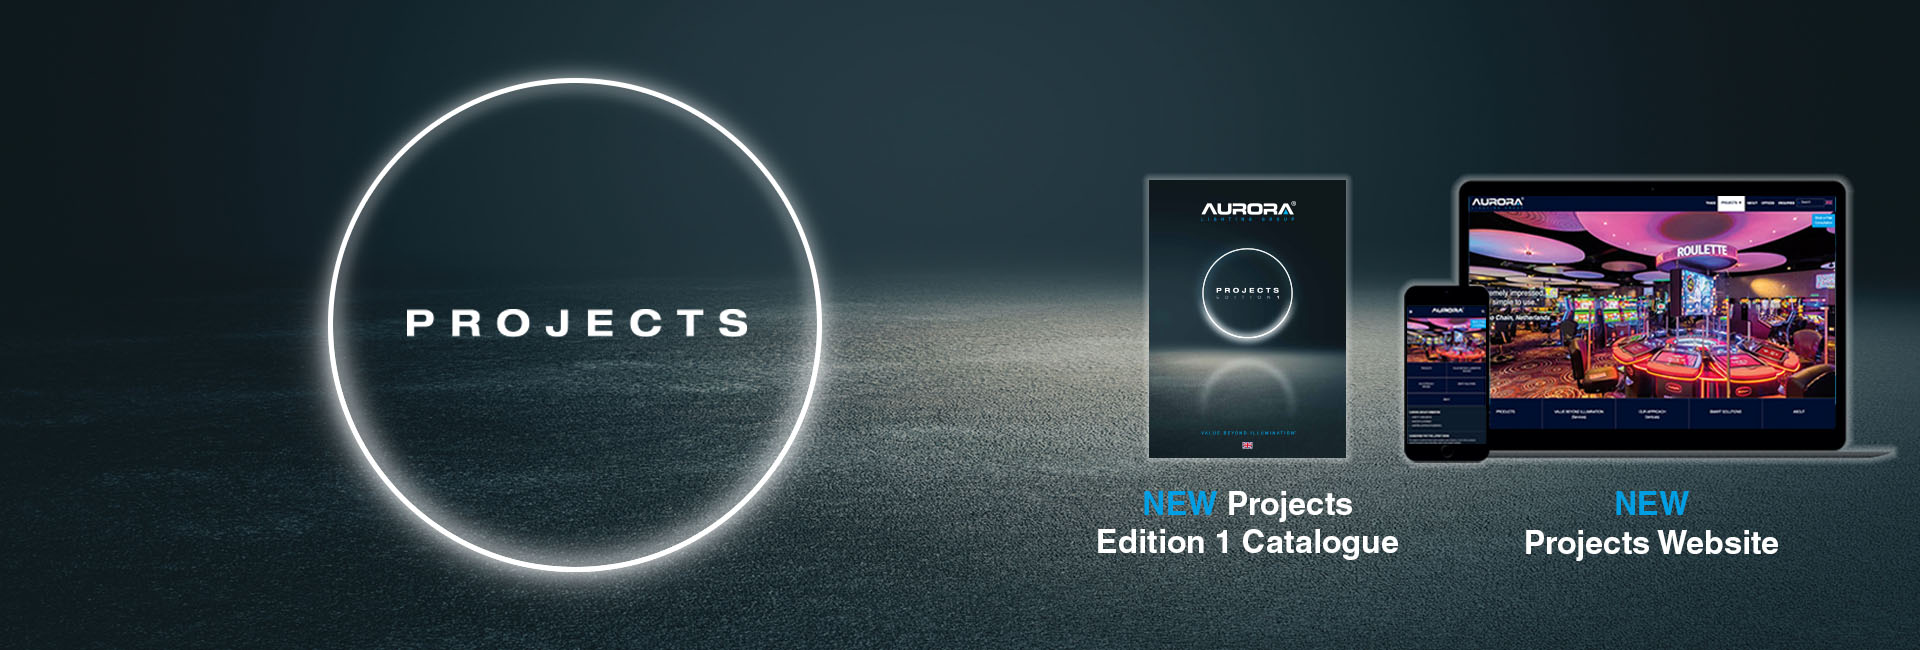 Show products in category NEW Projects Website Unveils Architectural Lighting & Smart Bluetooth Solution